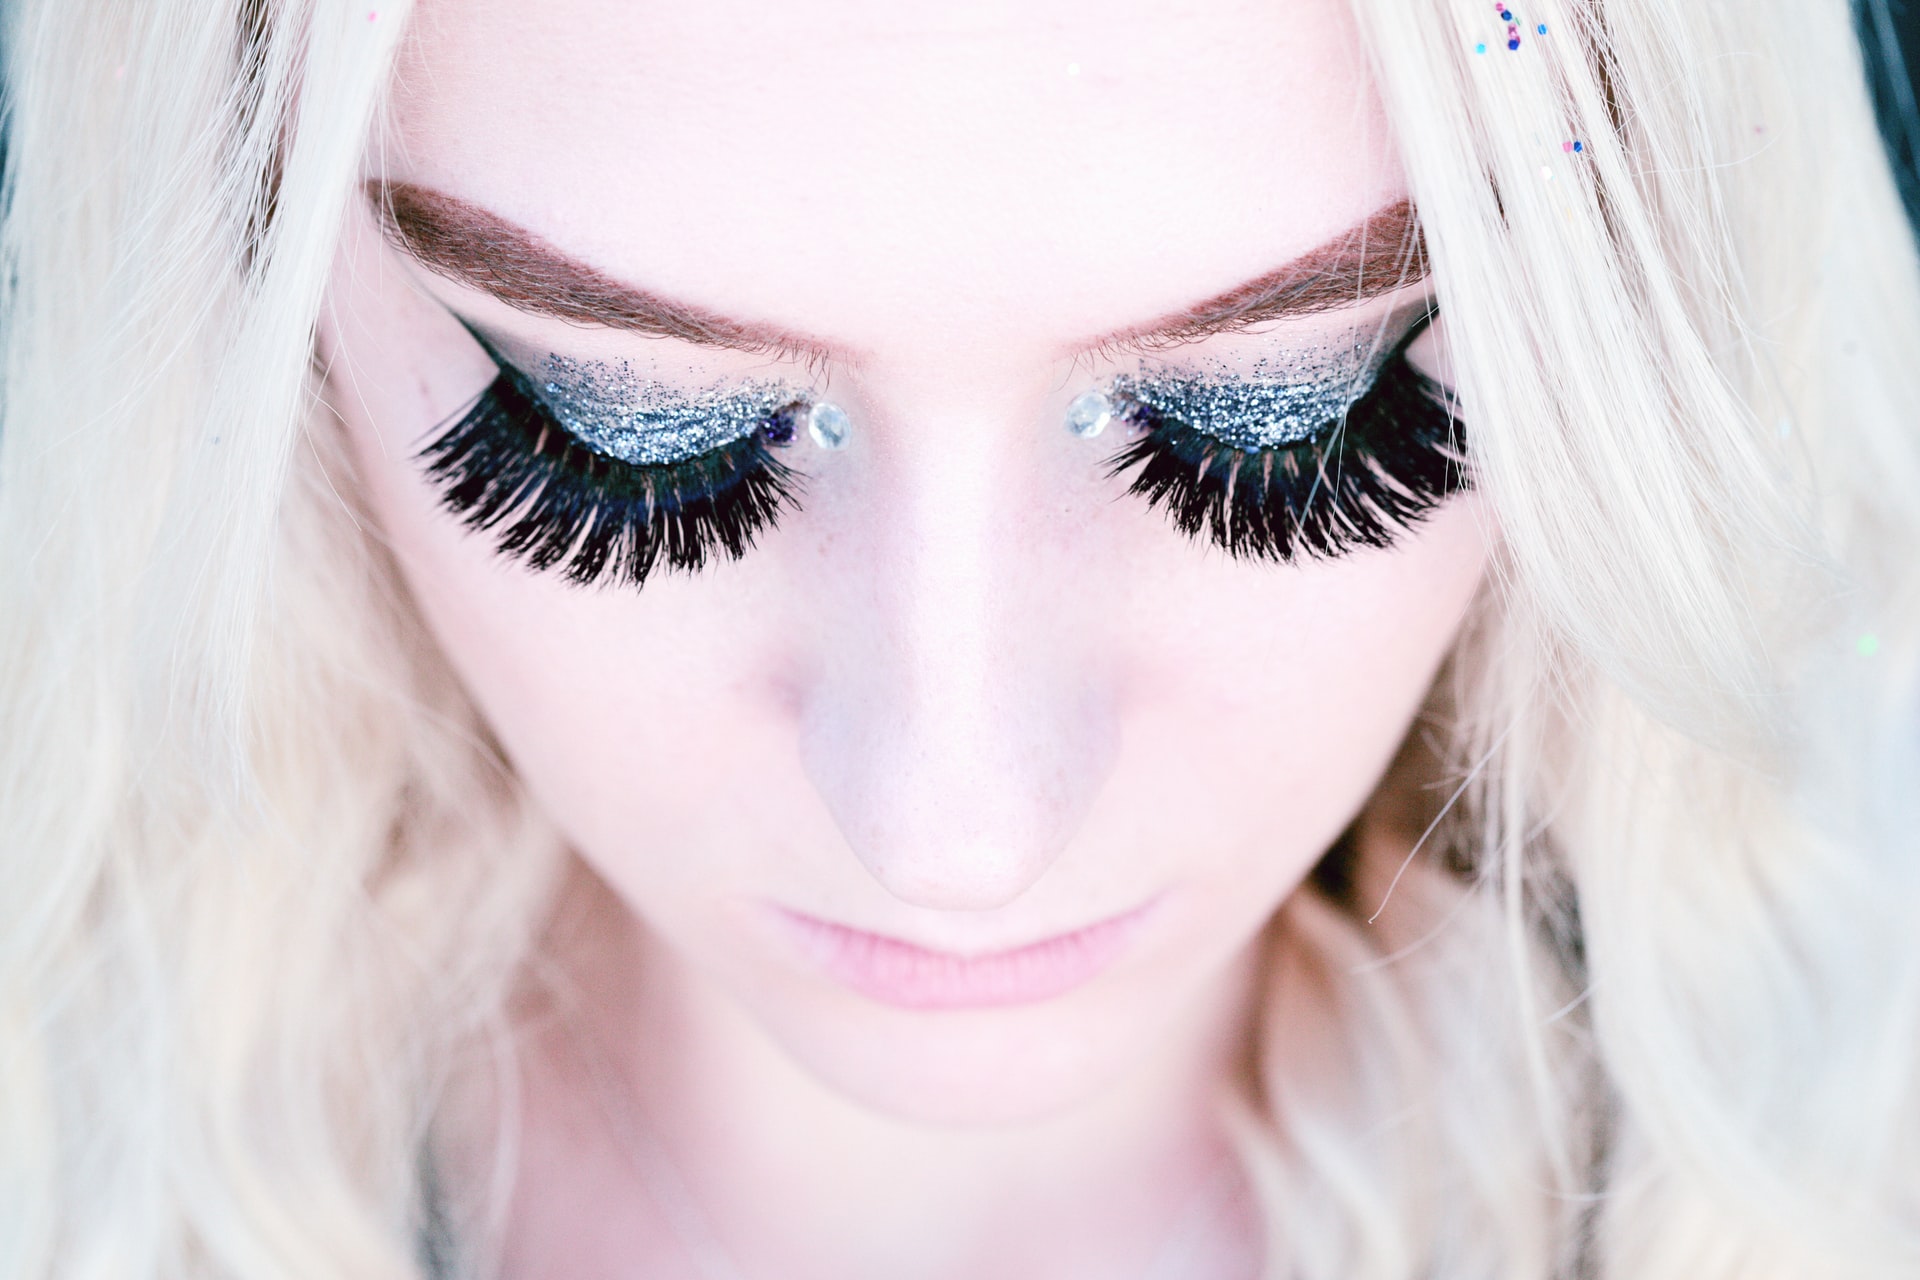 How to Apply Cluster Lashes? Step By Step Guide